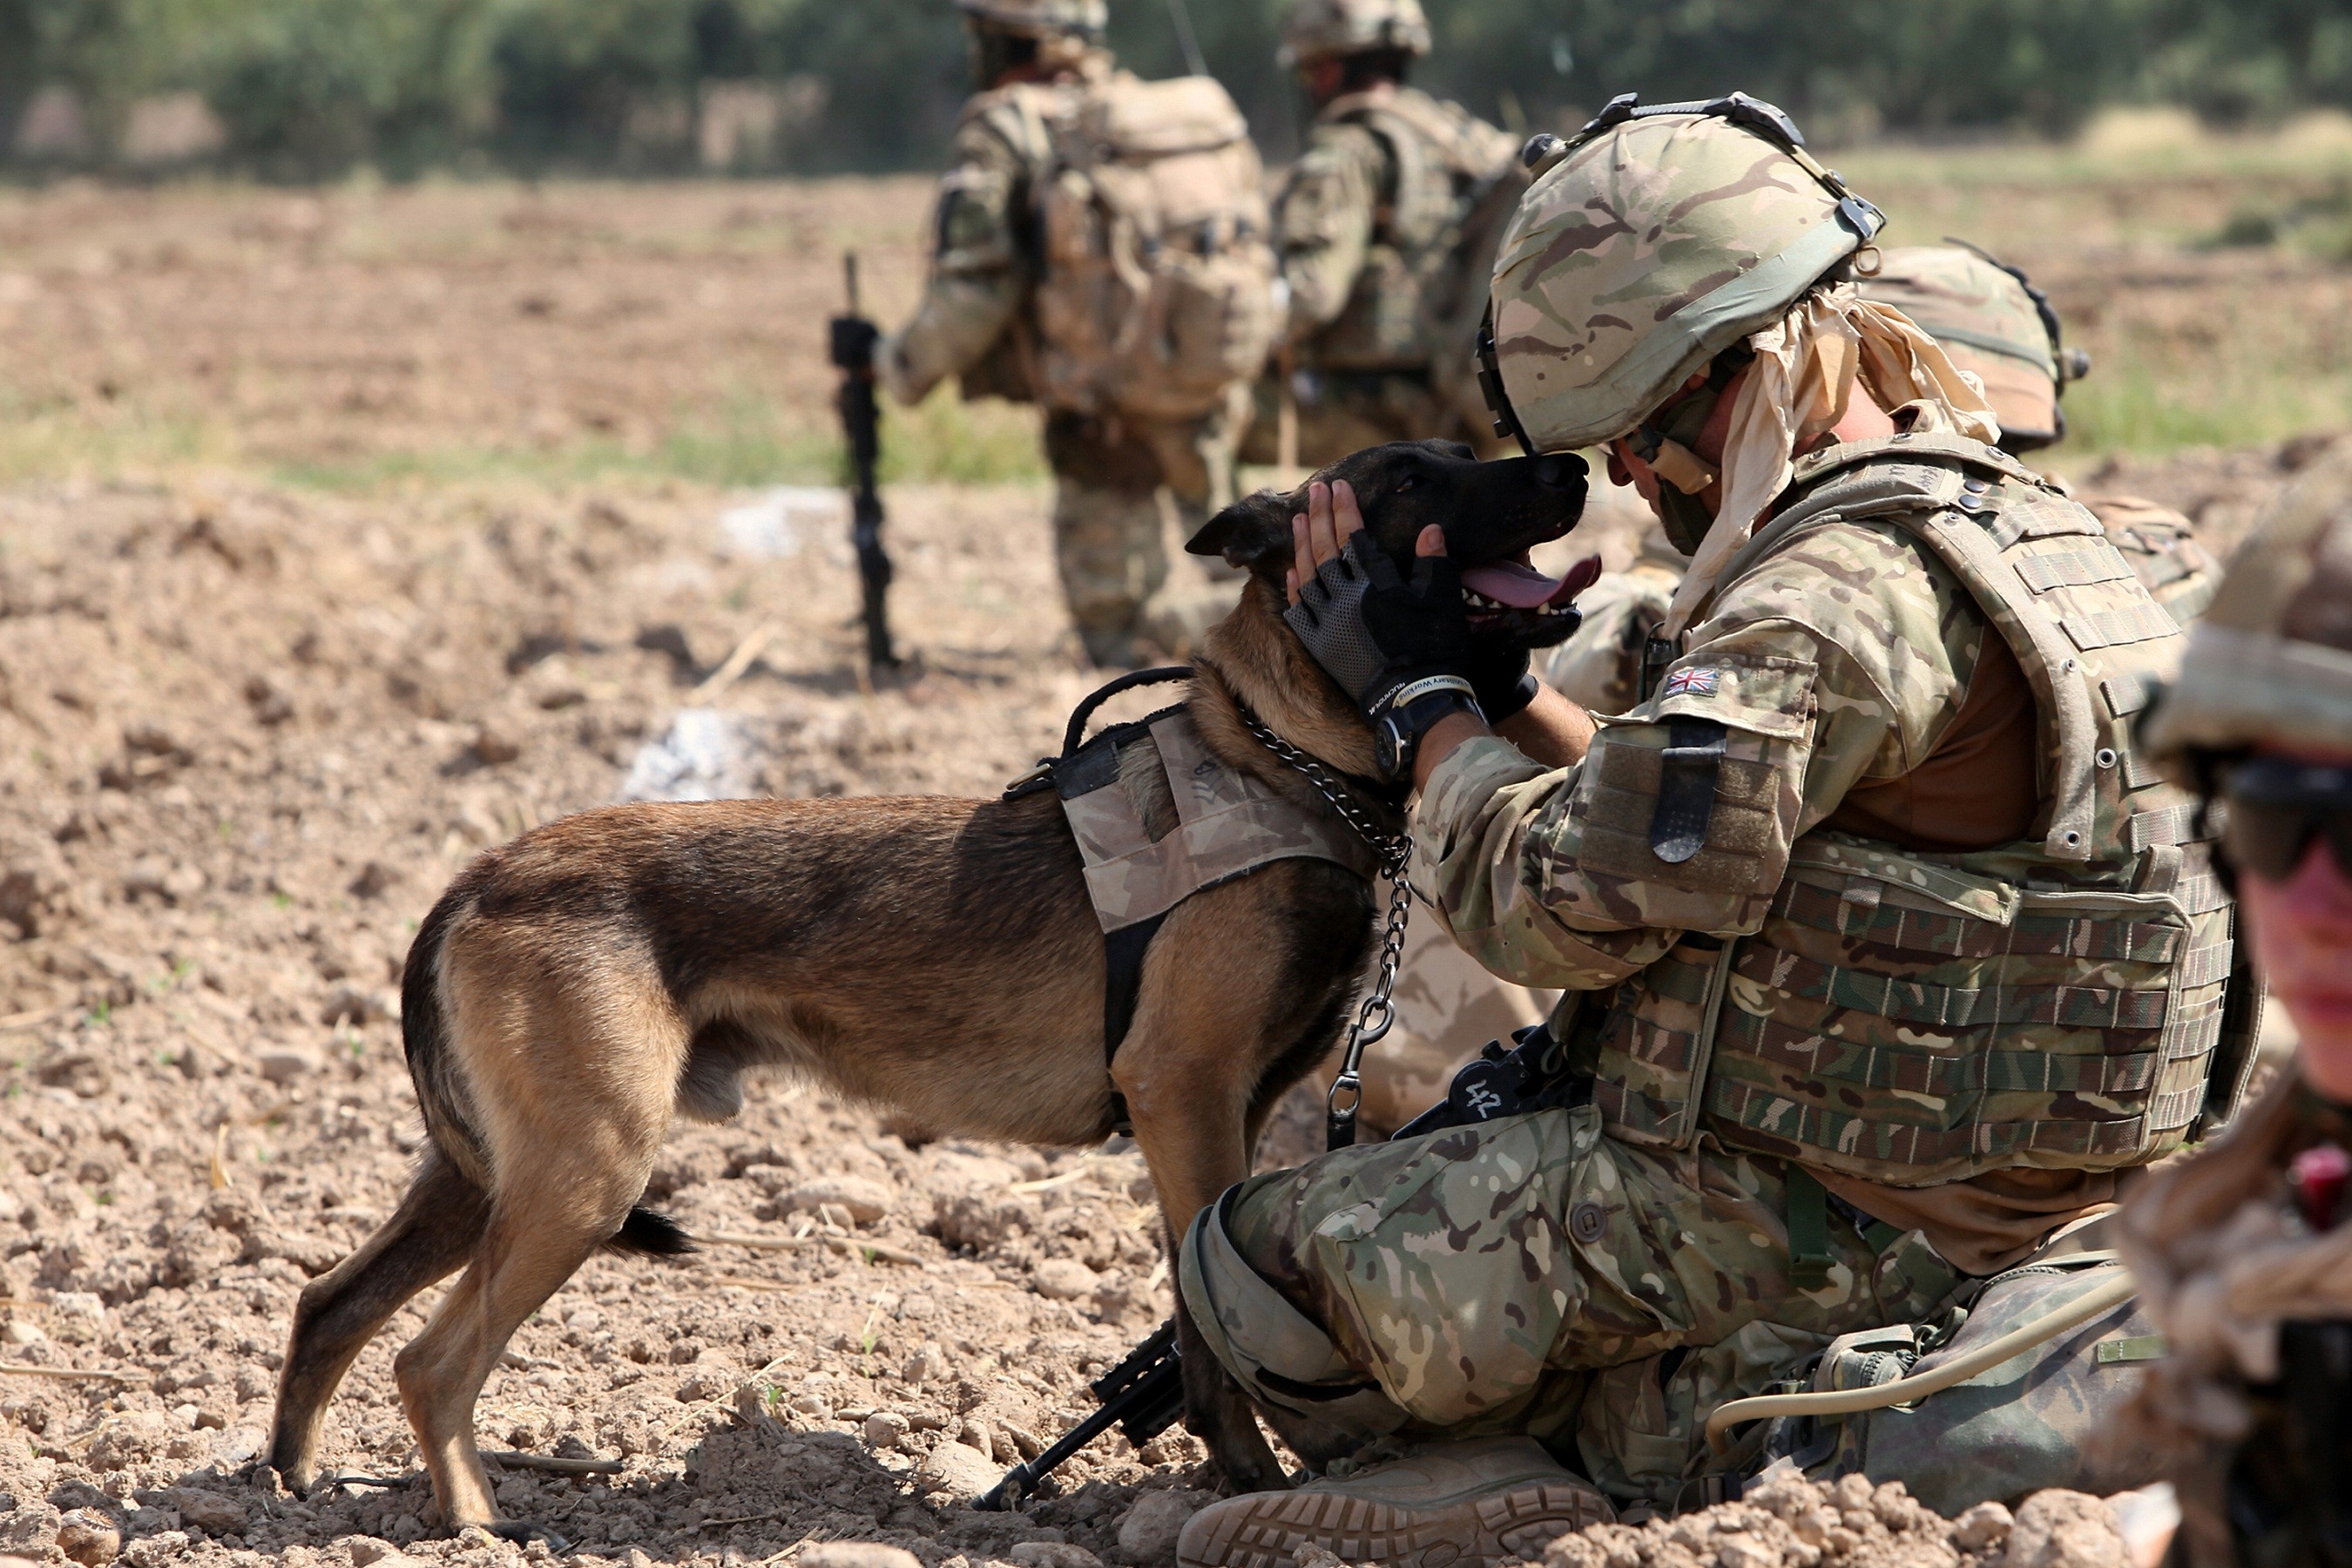 soldiers military dogs 2700x1800 wallpaper High Quality Wallpaper, High Definition Wallpaper